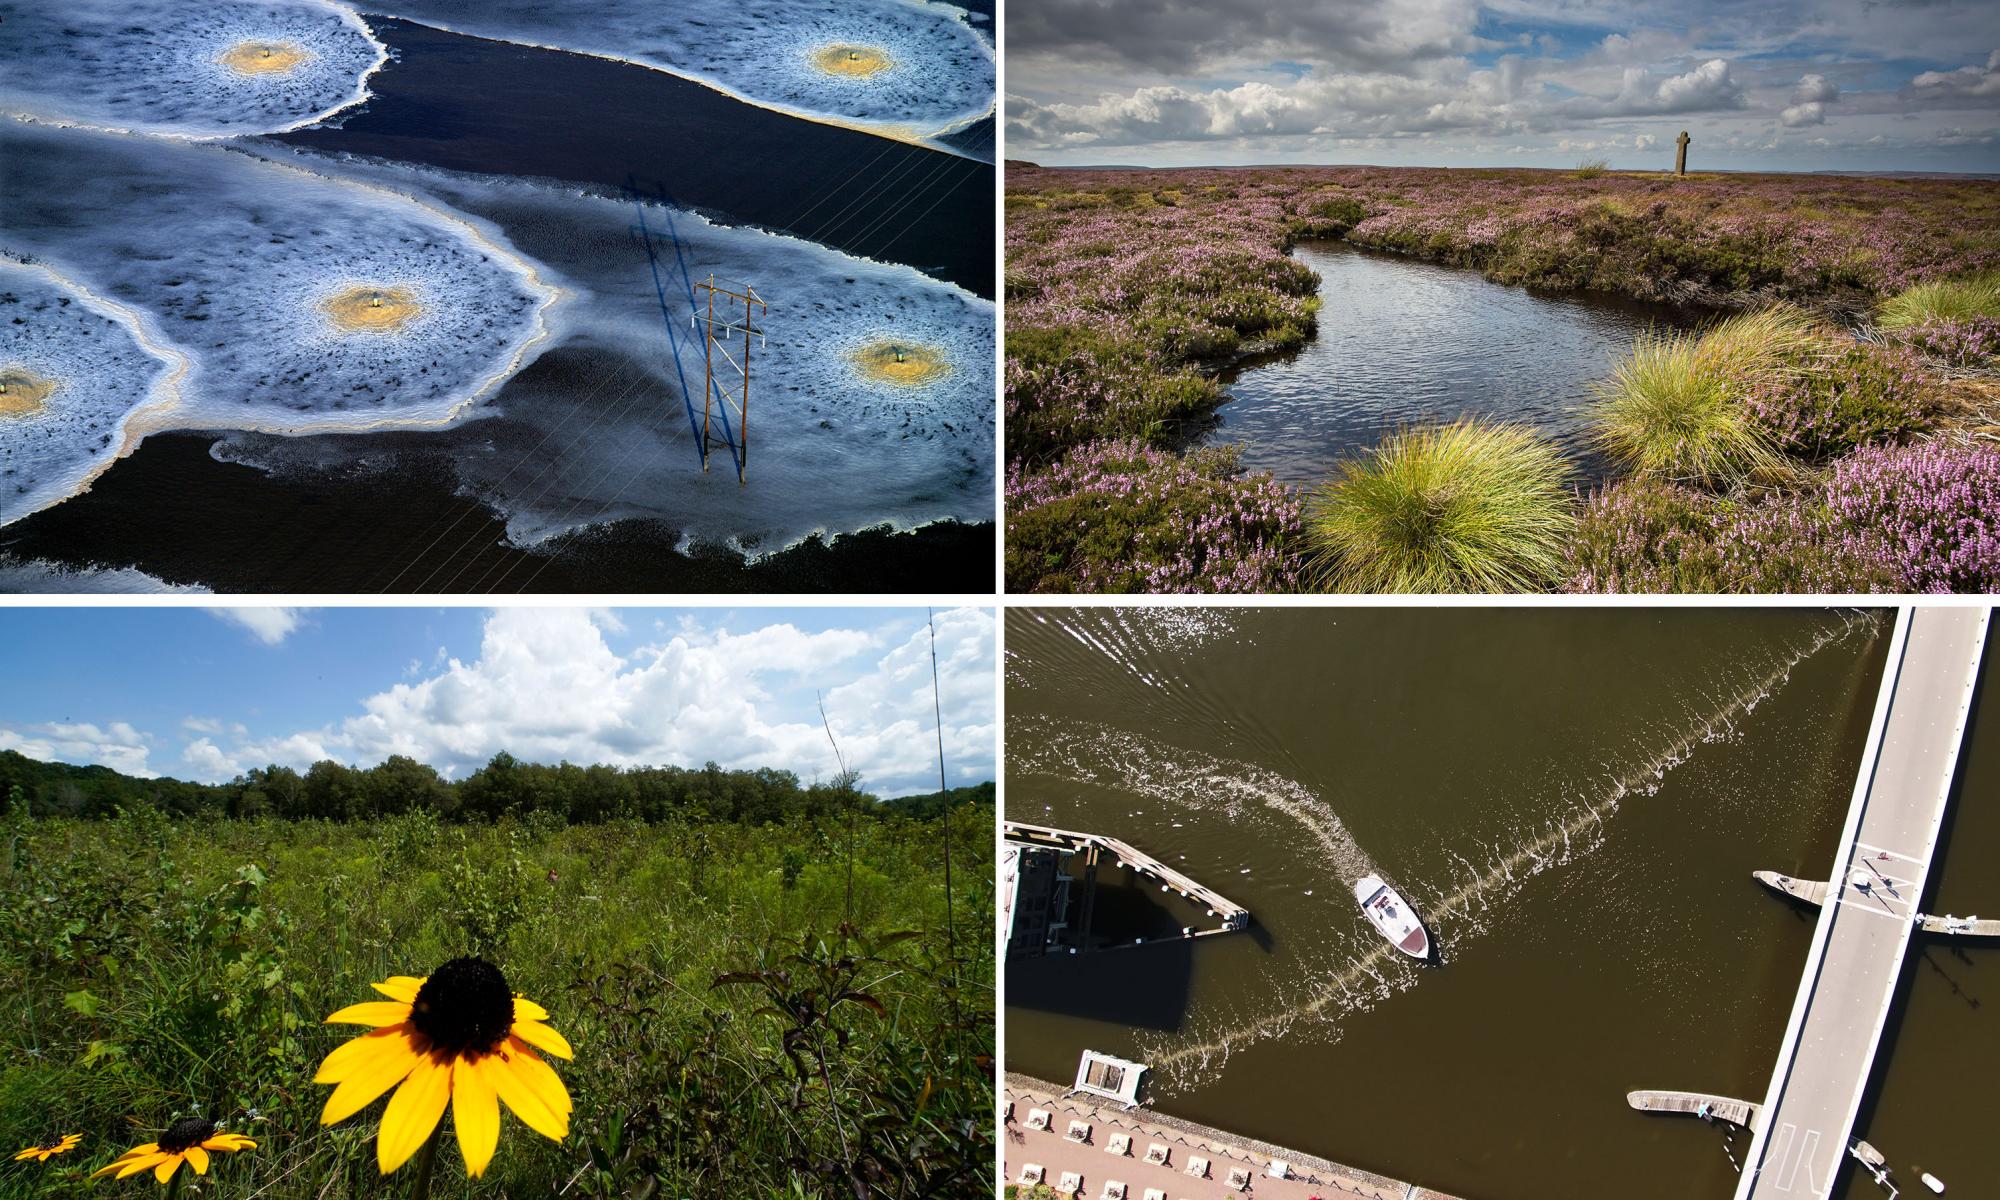 Bogs, banks and bubble barriers: five great projects to protect nature